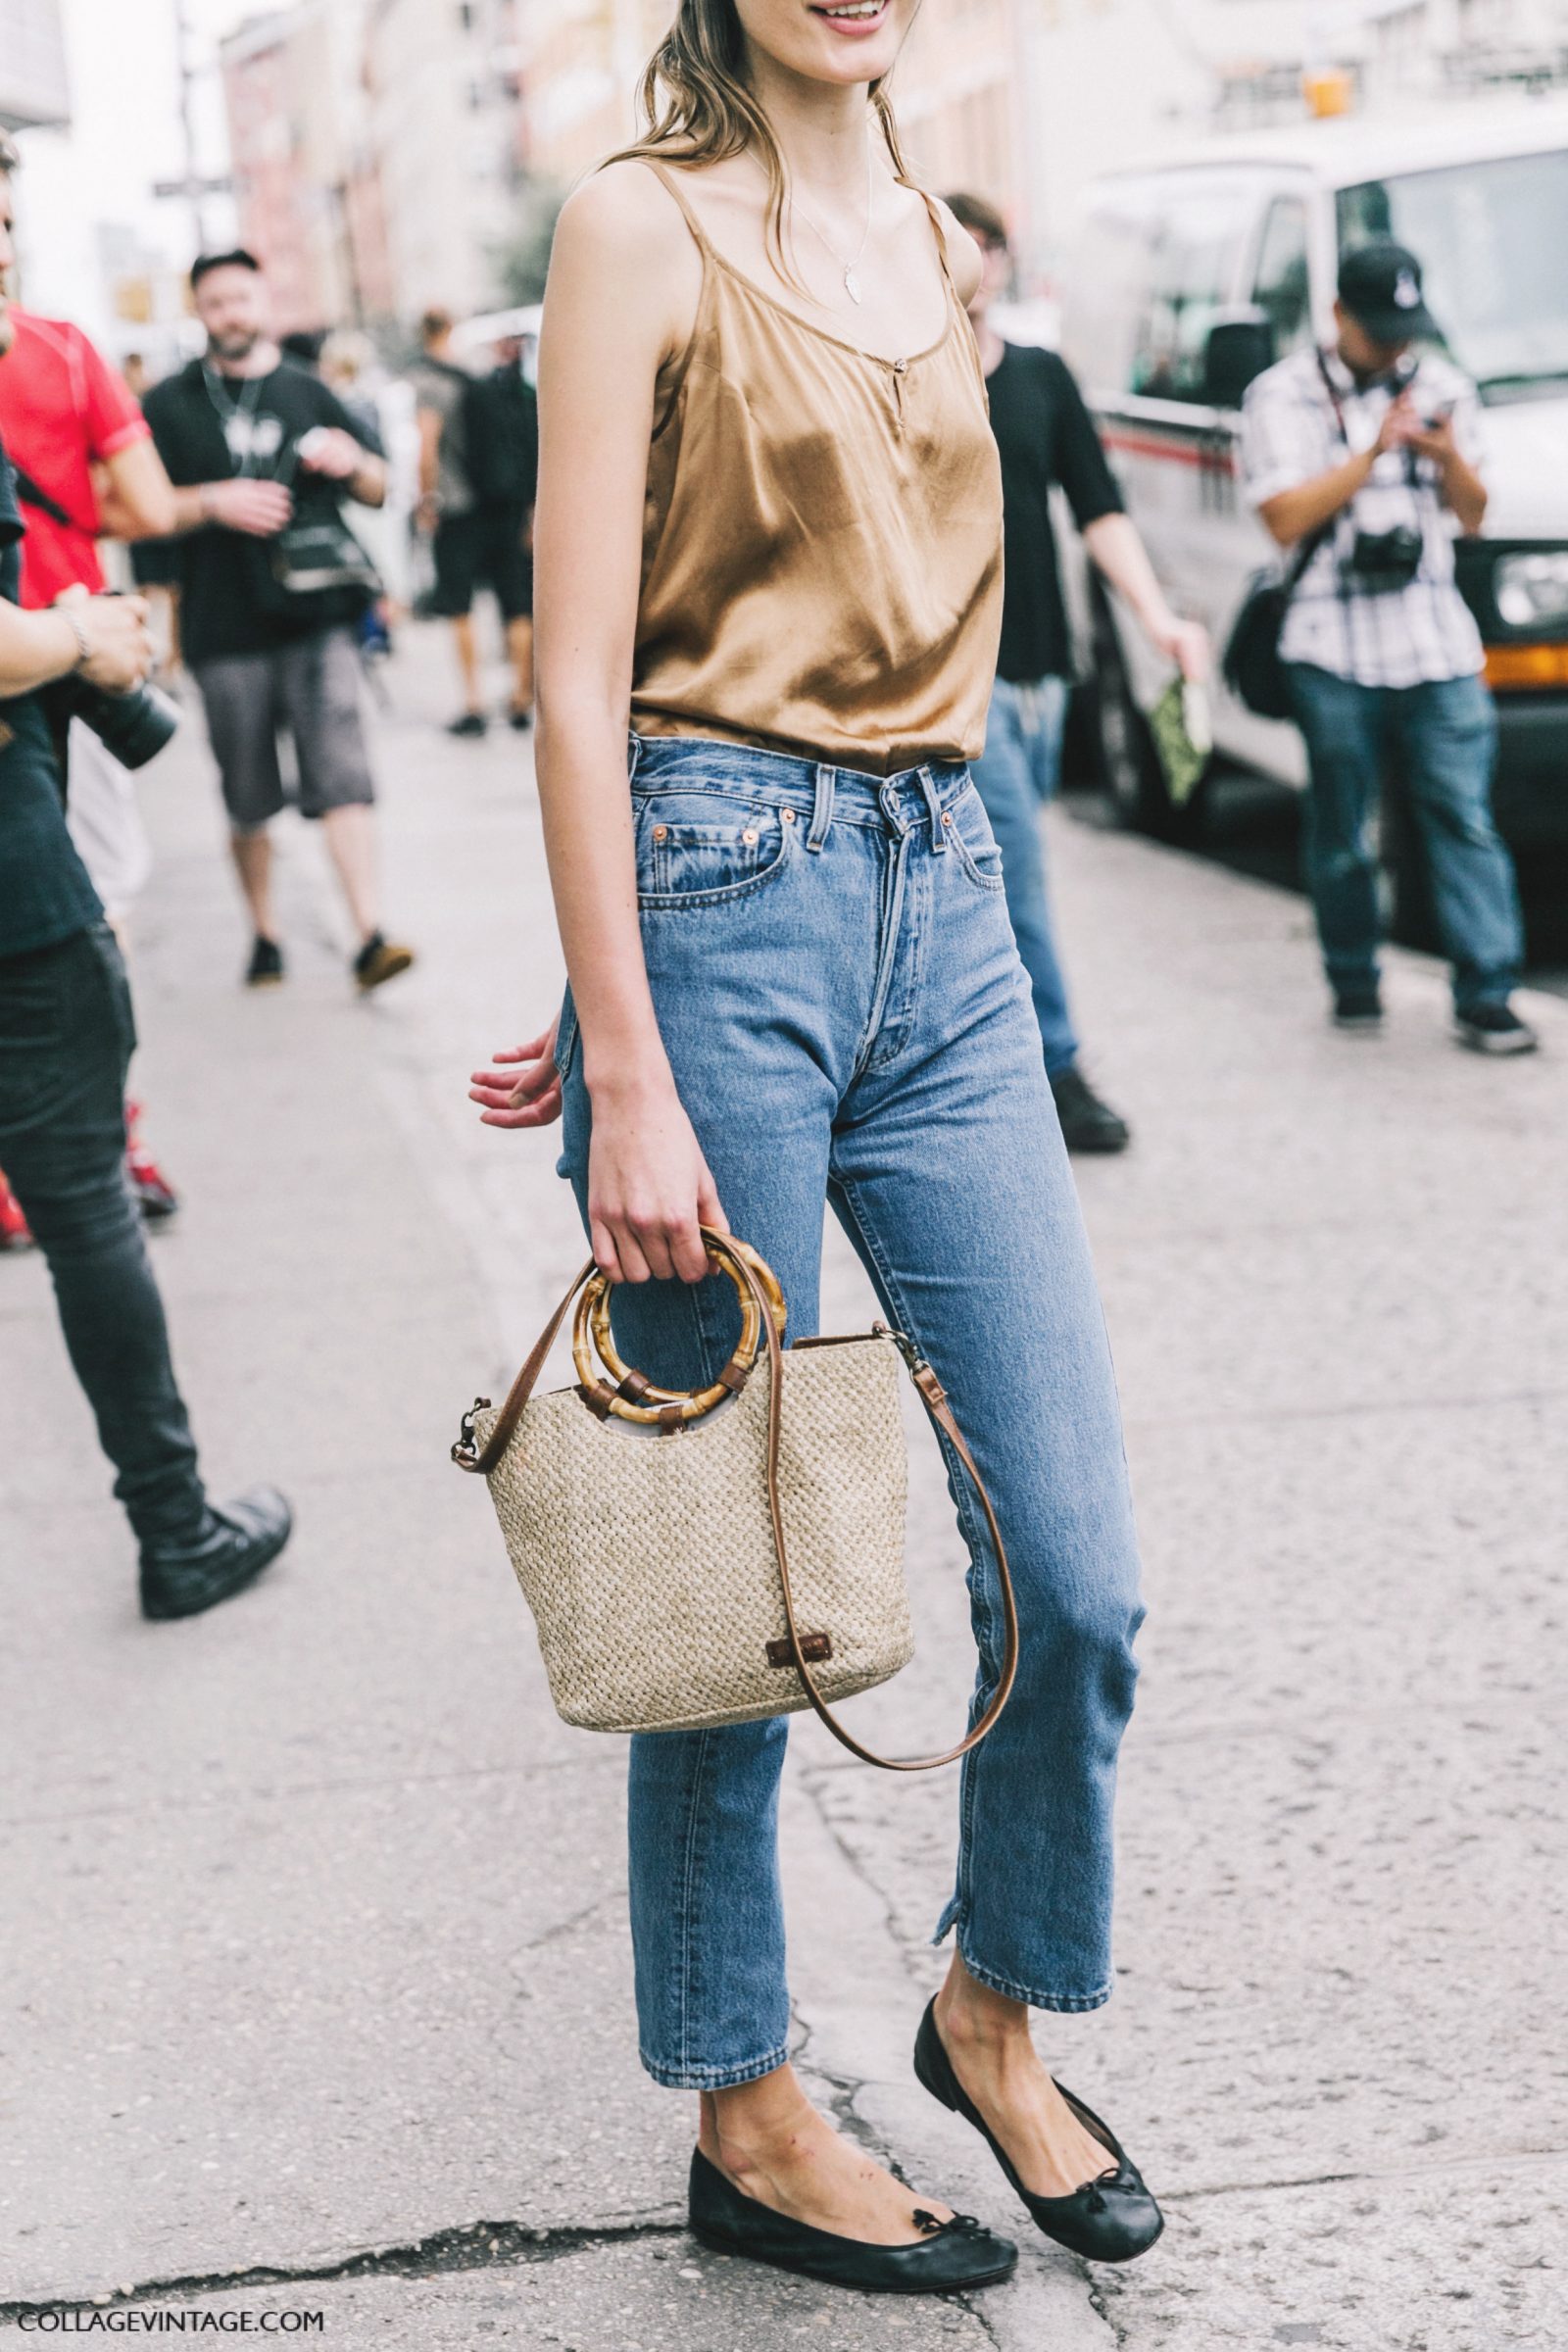 nyfw-new_york_fashion_week_ss17-street_style-outfits-collage_vintage-models-19